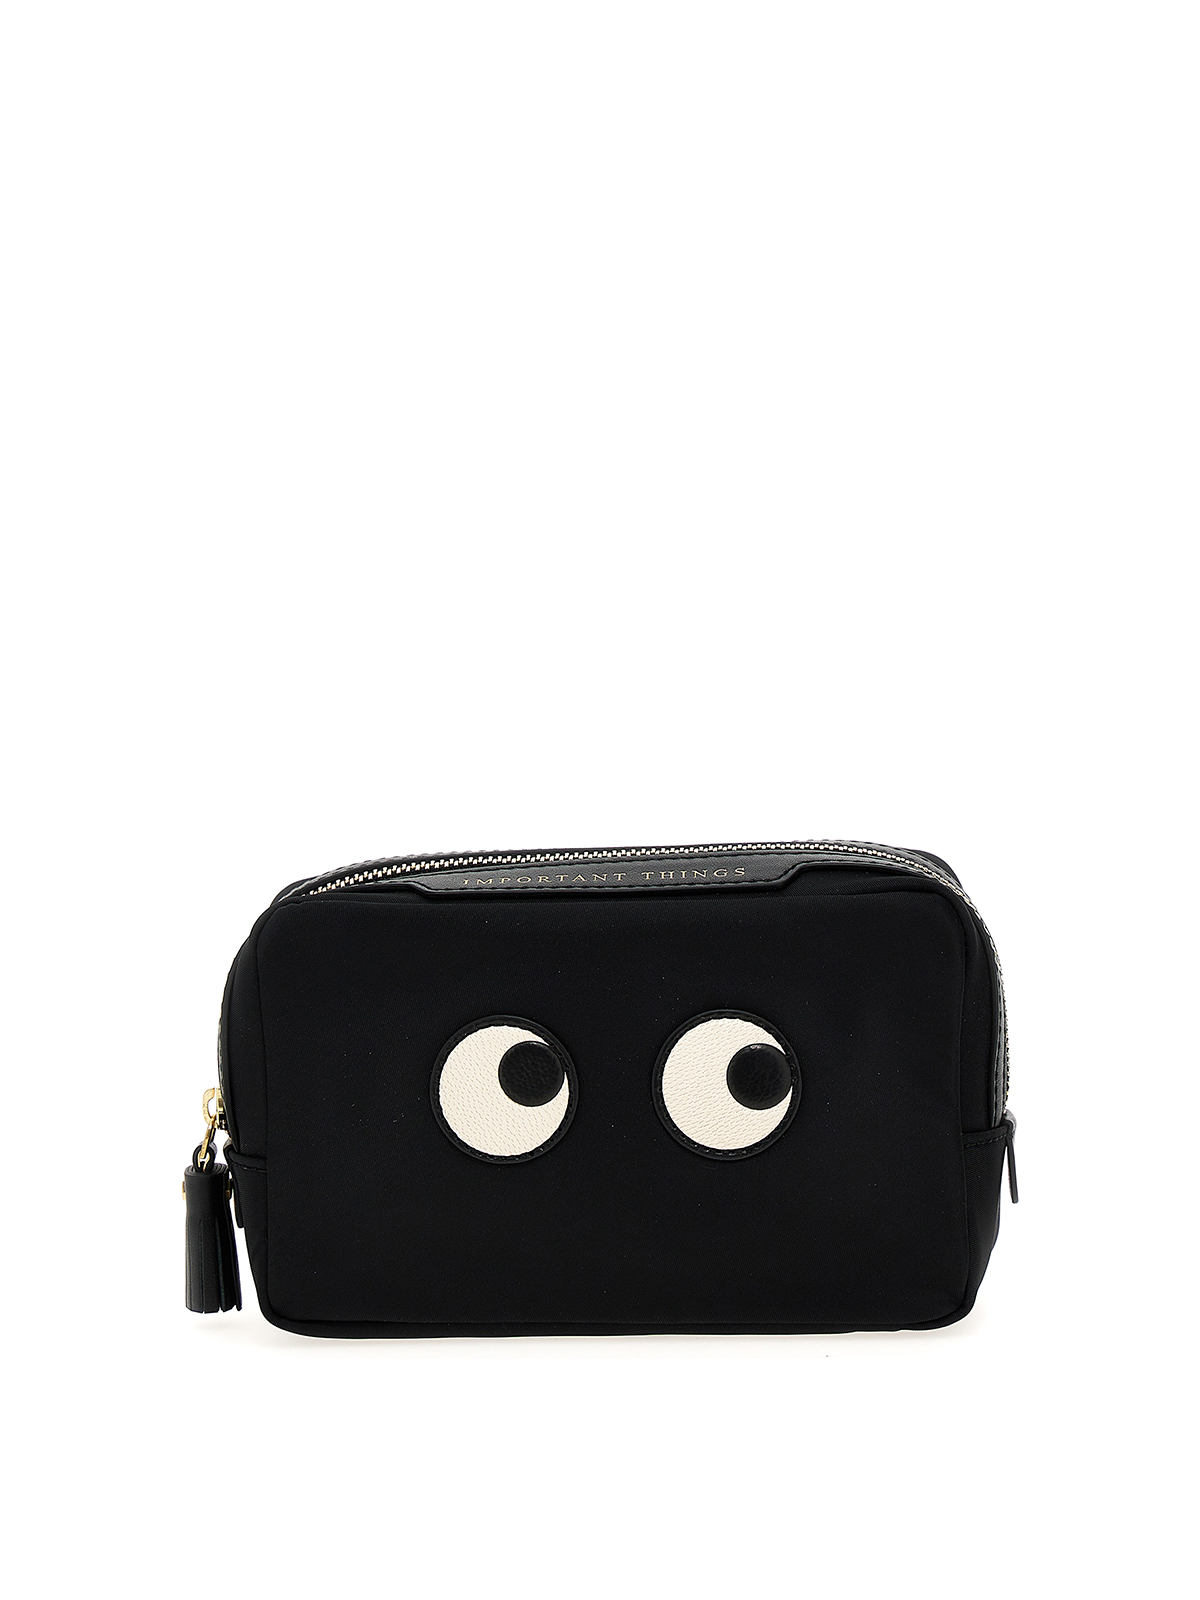 Cases & Covers Anya Hindmarch - Important things eyes pouch